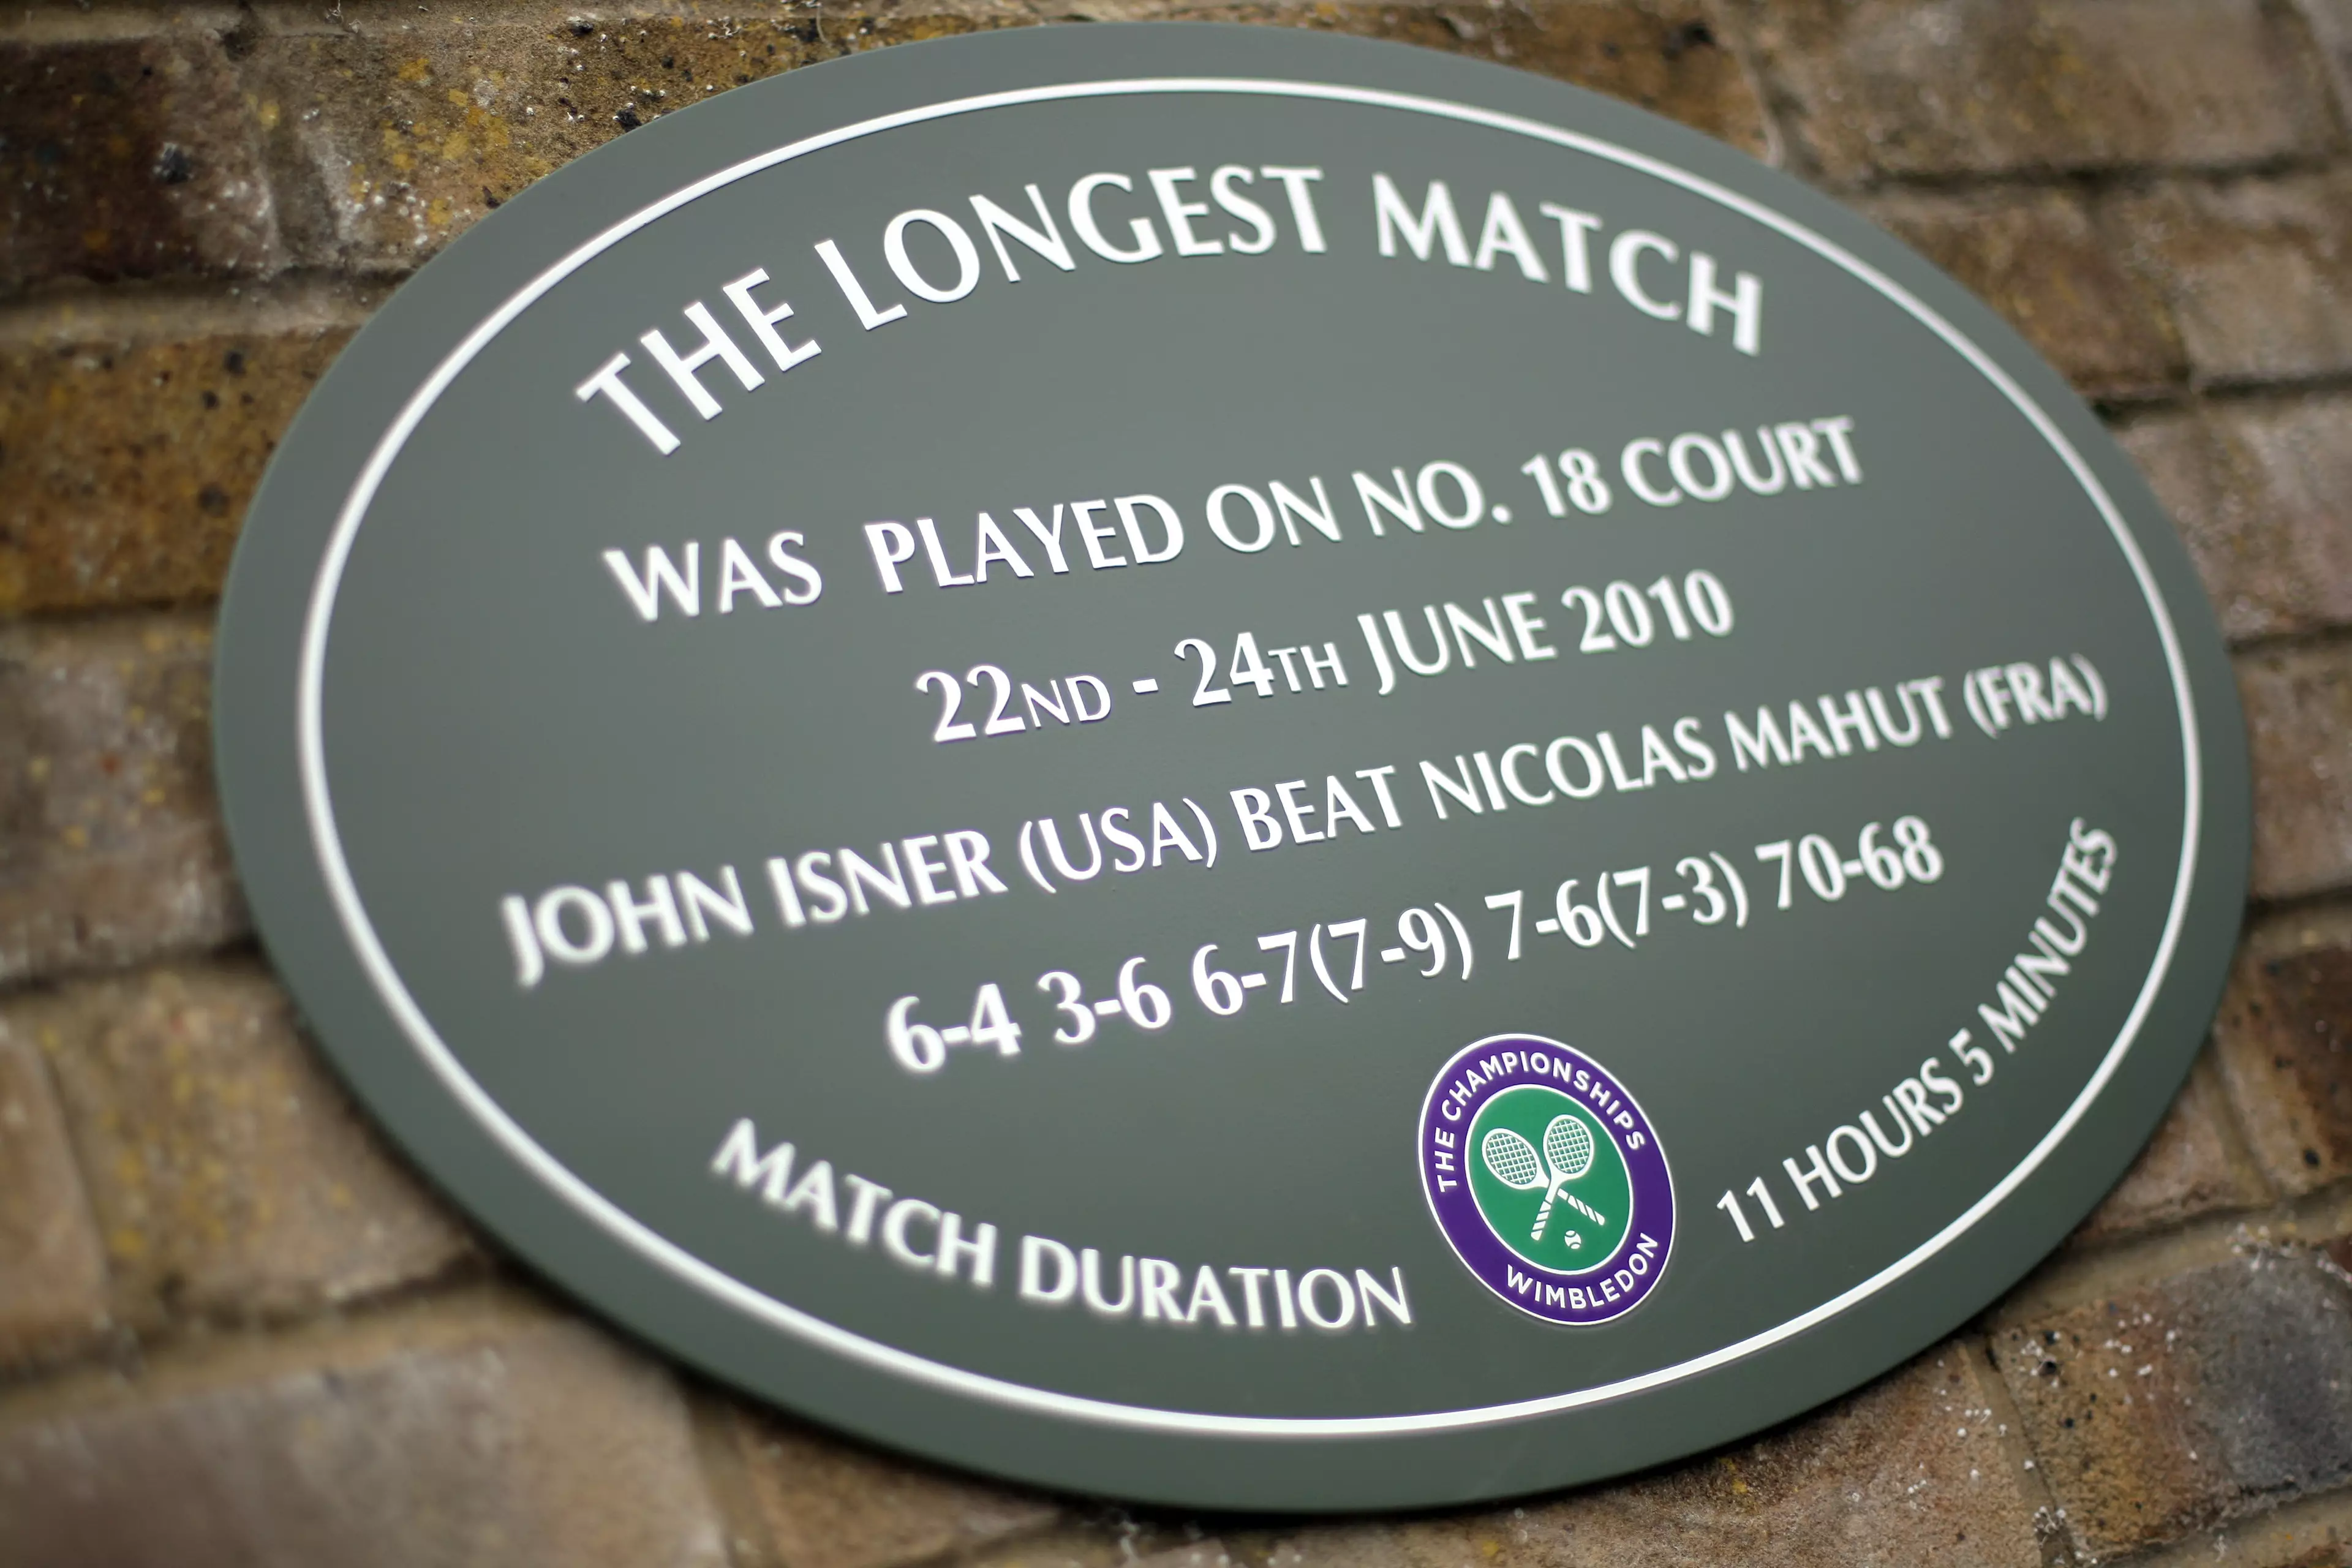 A plaque on Court 18 commemorates the incredible match. Image: PA Images